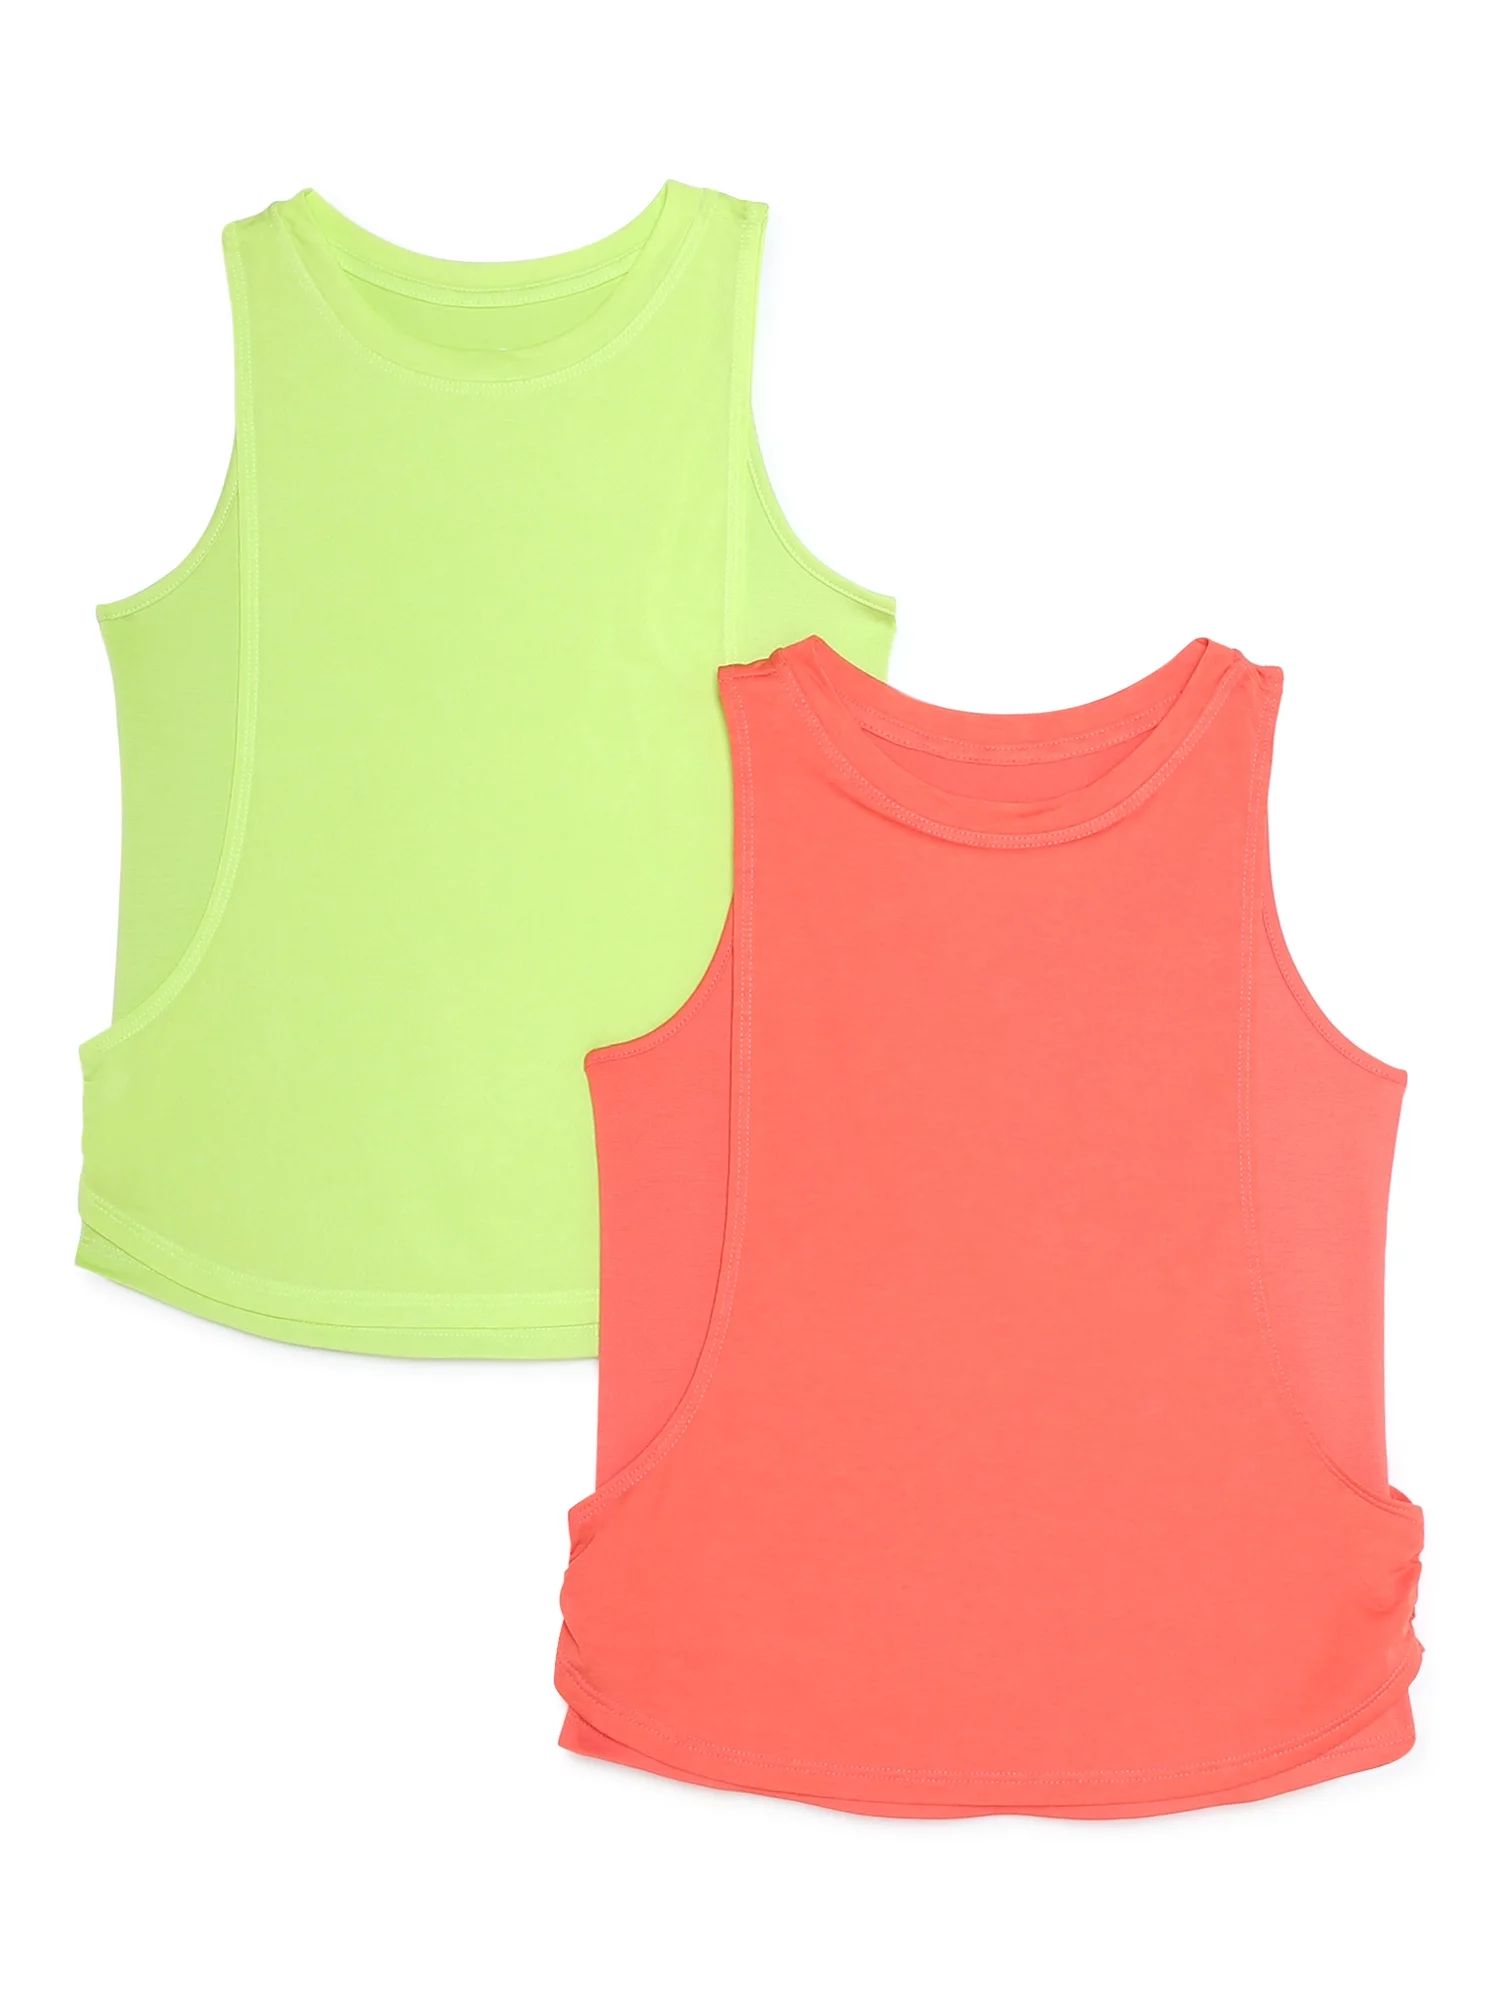 Athletic Works Girls Muscle Tank Tops, 2-Pack, Sizes 4-18 & Plus | Walmart (US)